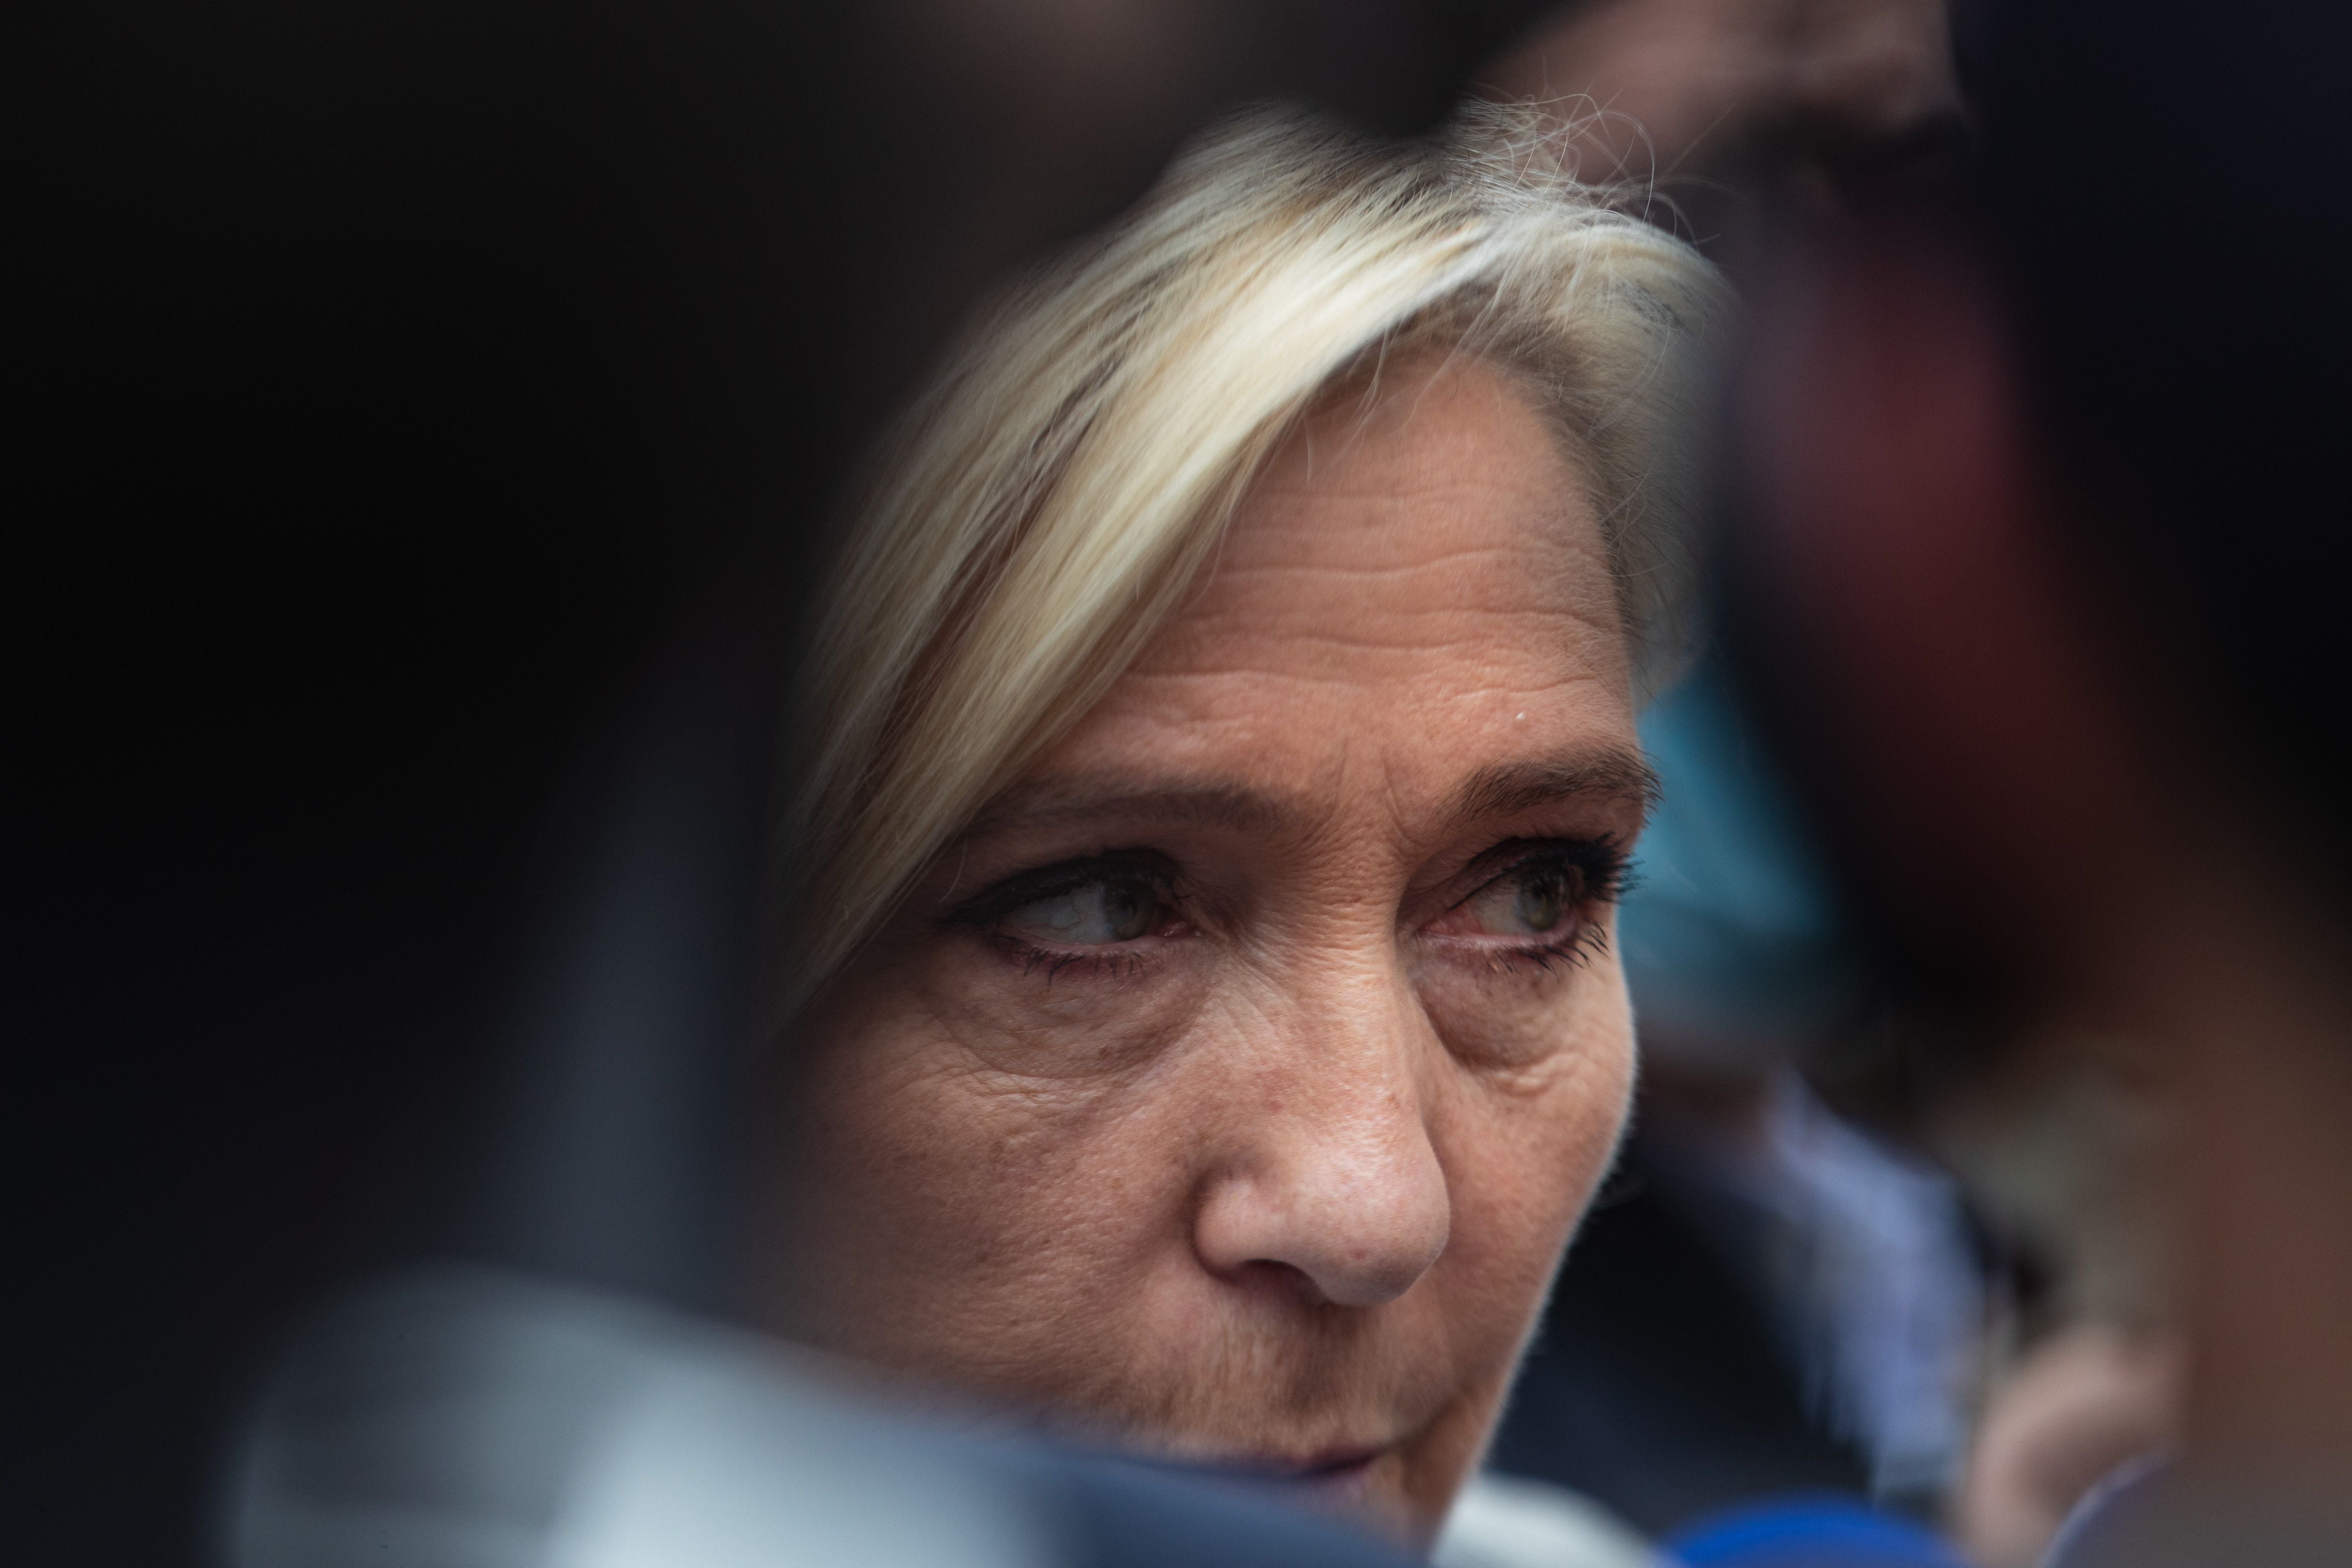 French far-right presidential candidate Marine Le Pen